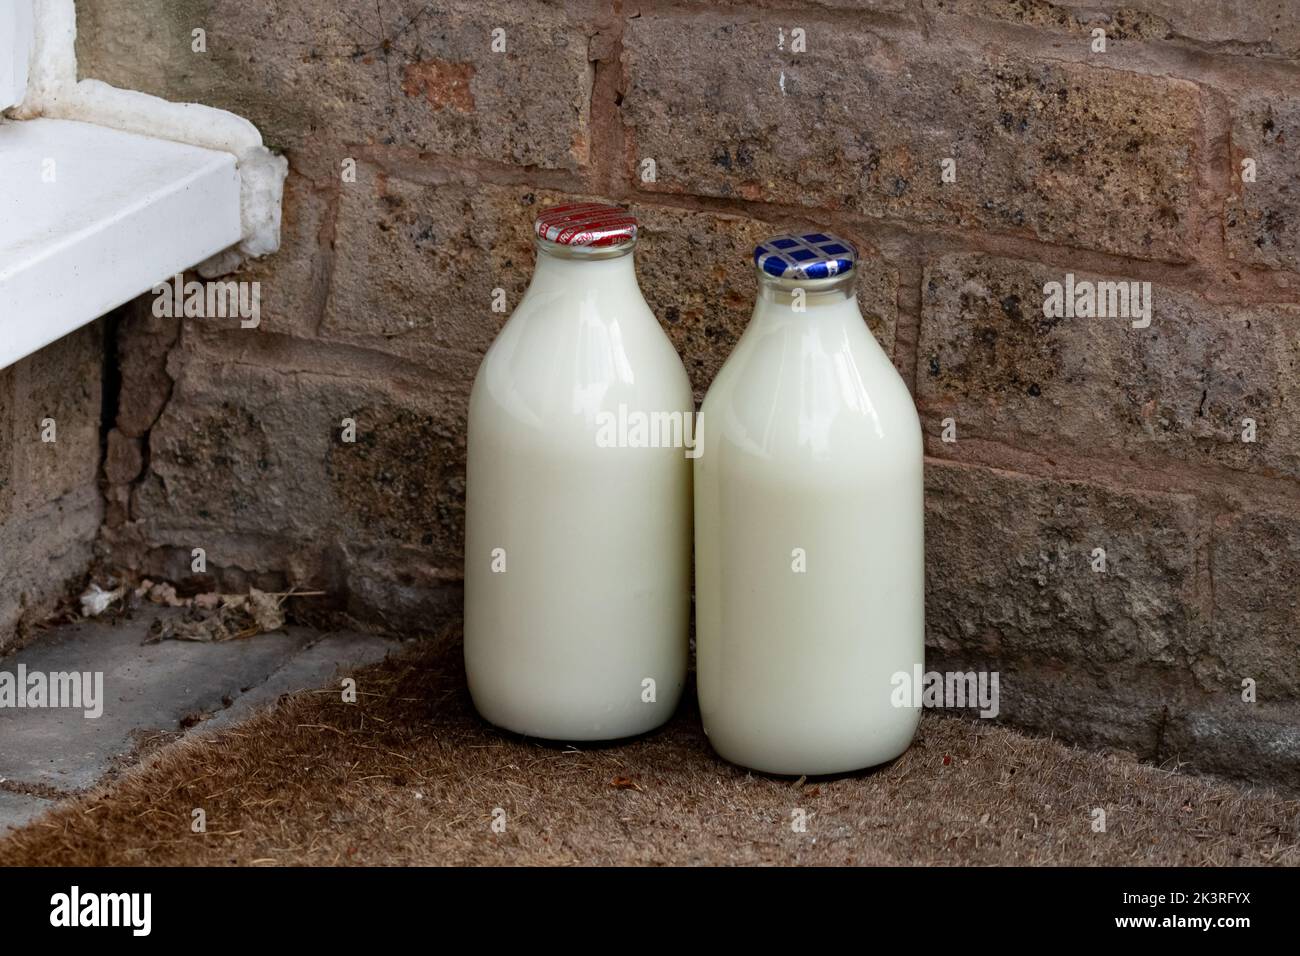 Two pints of milk in glass bottles on a doorstep in Yorkshire, England. The red top is semi-skimmed milk, the blue top is skimmed. Stock Photo